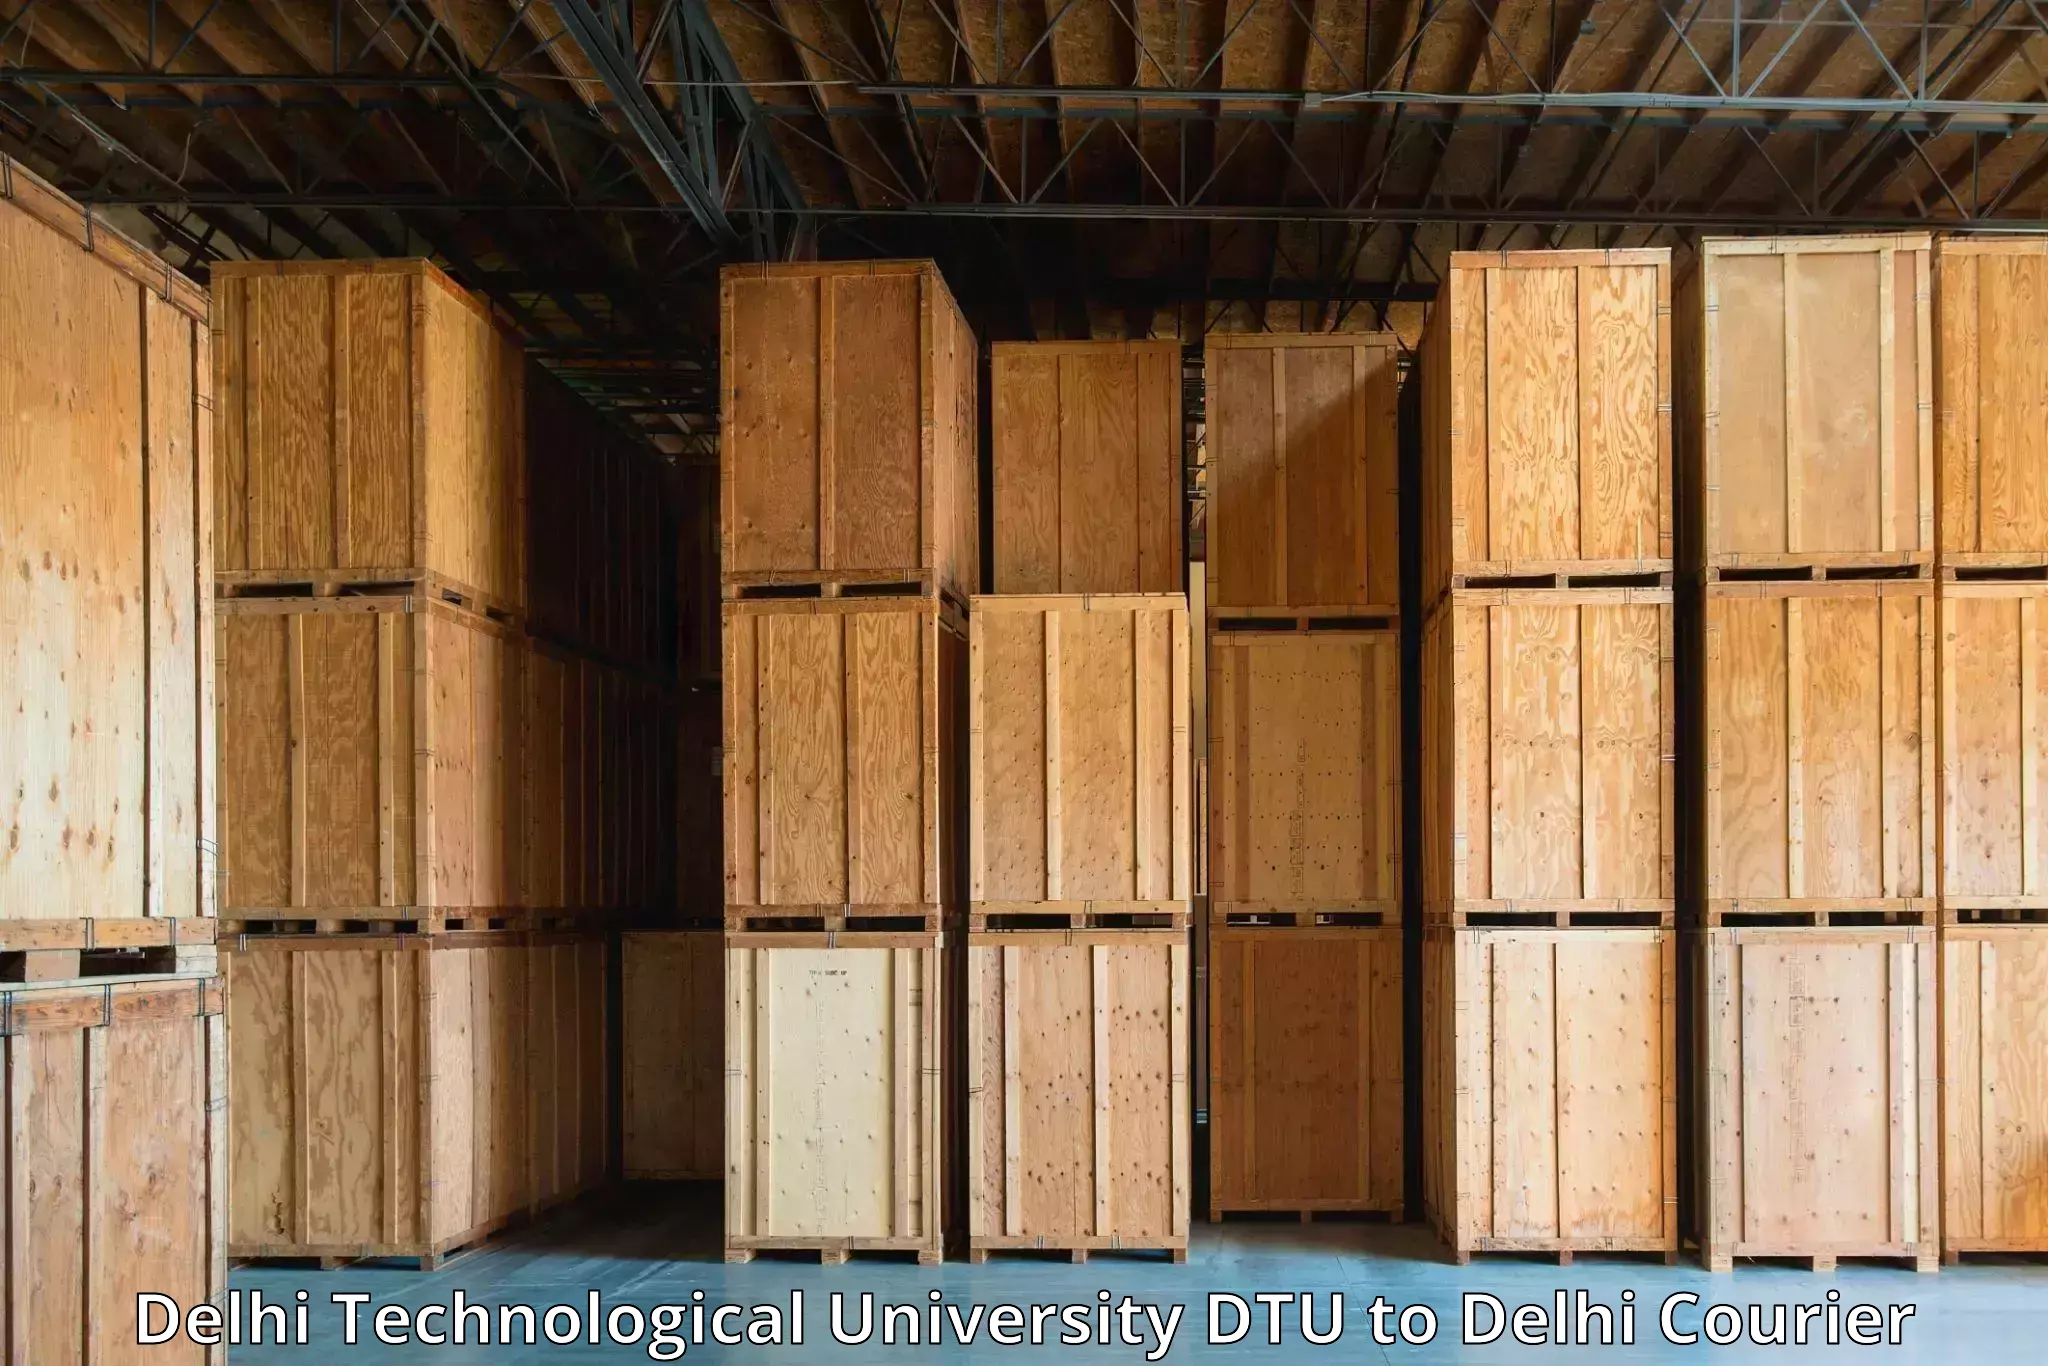 Affordable shipping rates Delhi Technological University DTU to NCR